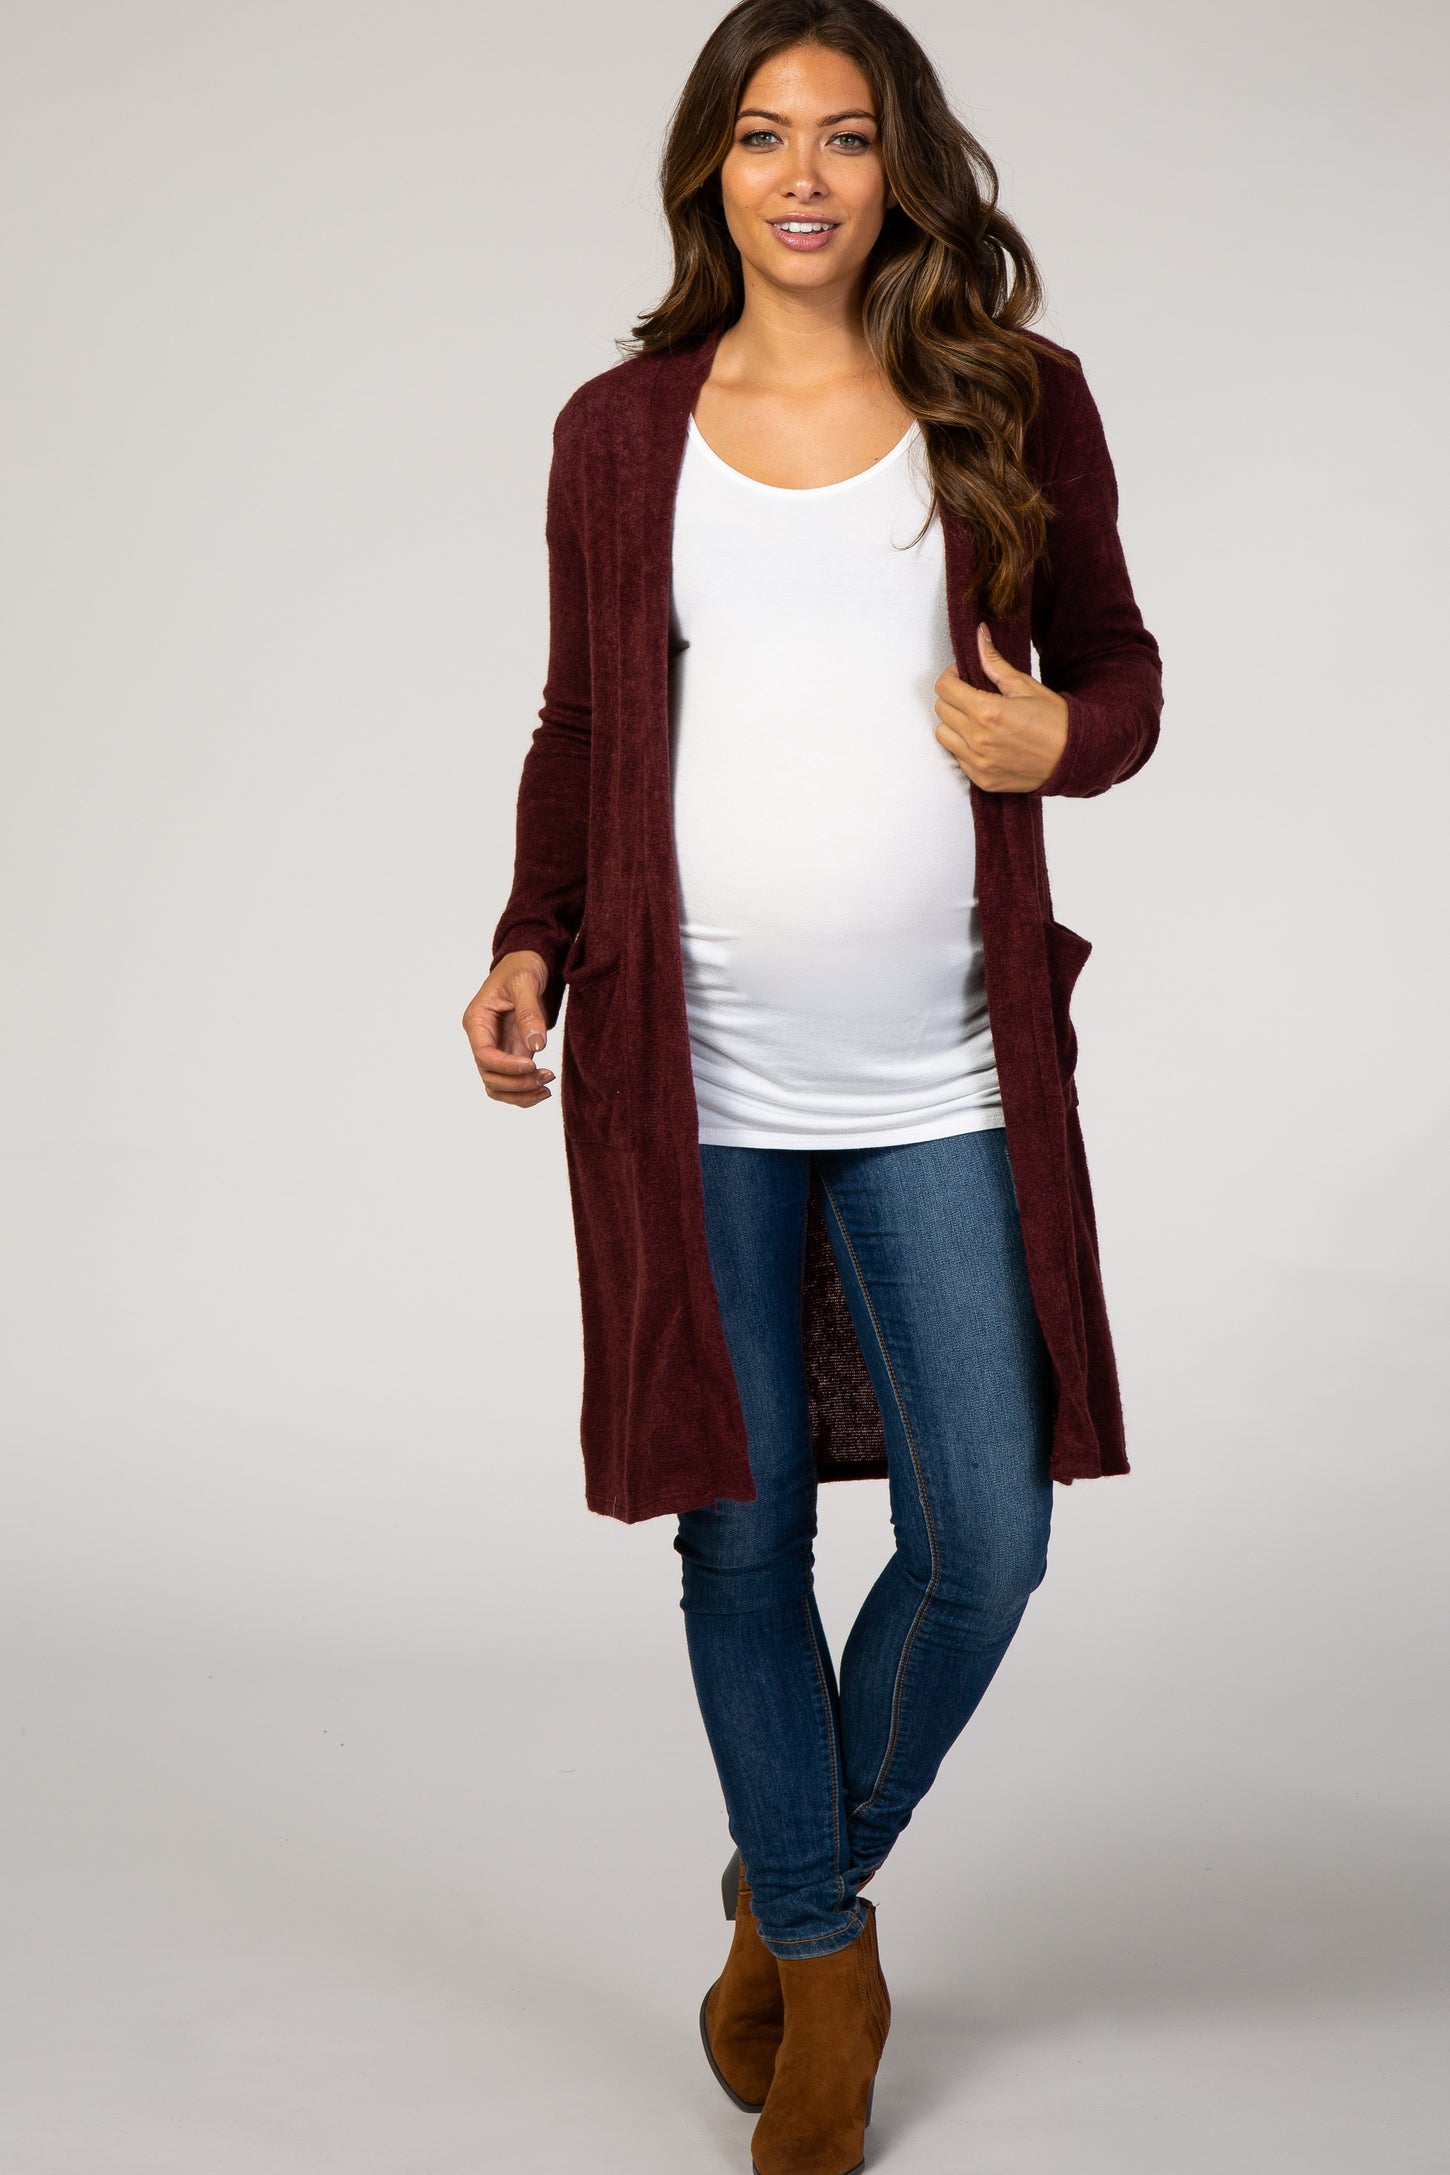 PinkBlush Burgundy Solid Knit Elbow Patch Maternity Cardigan